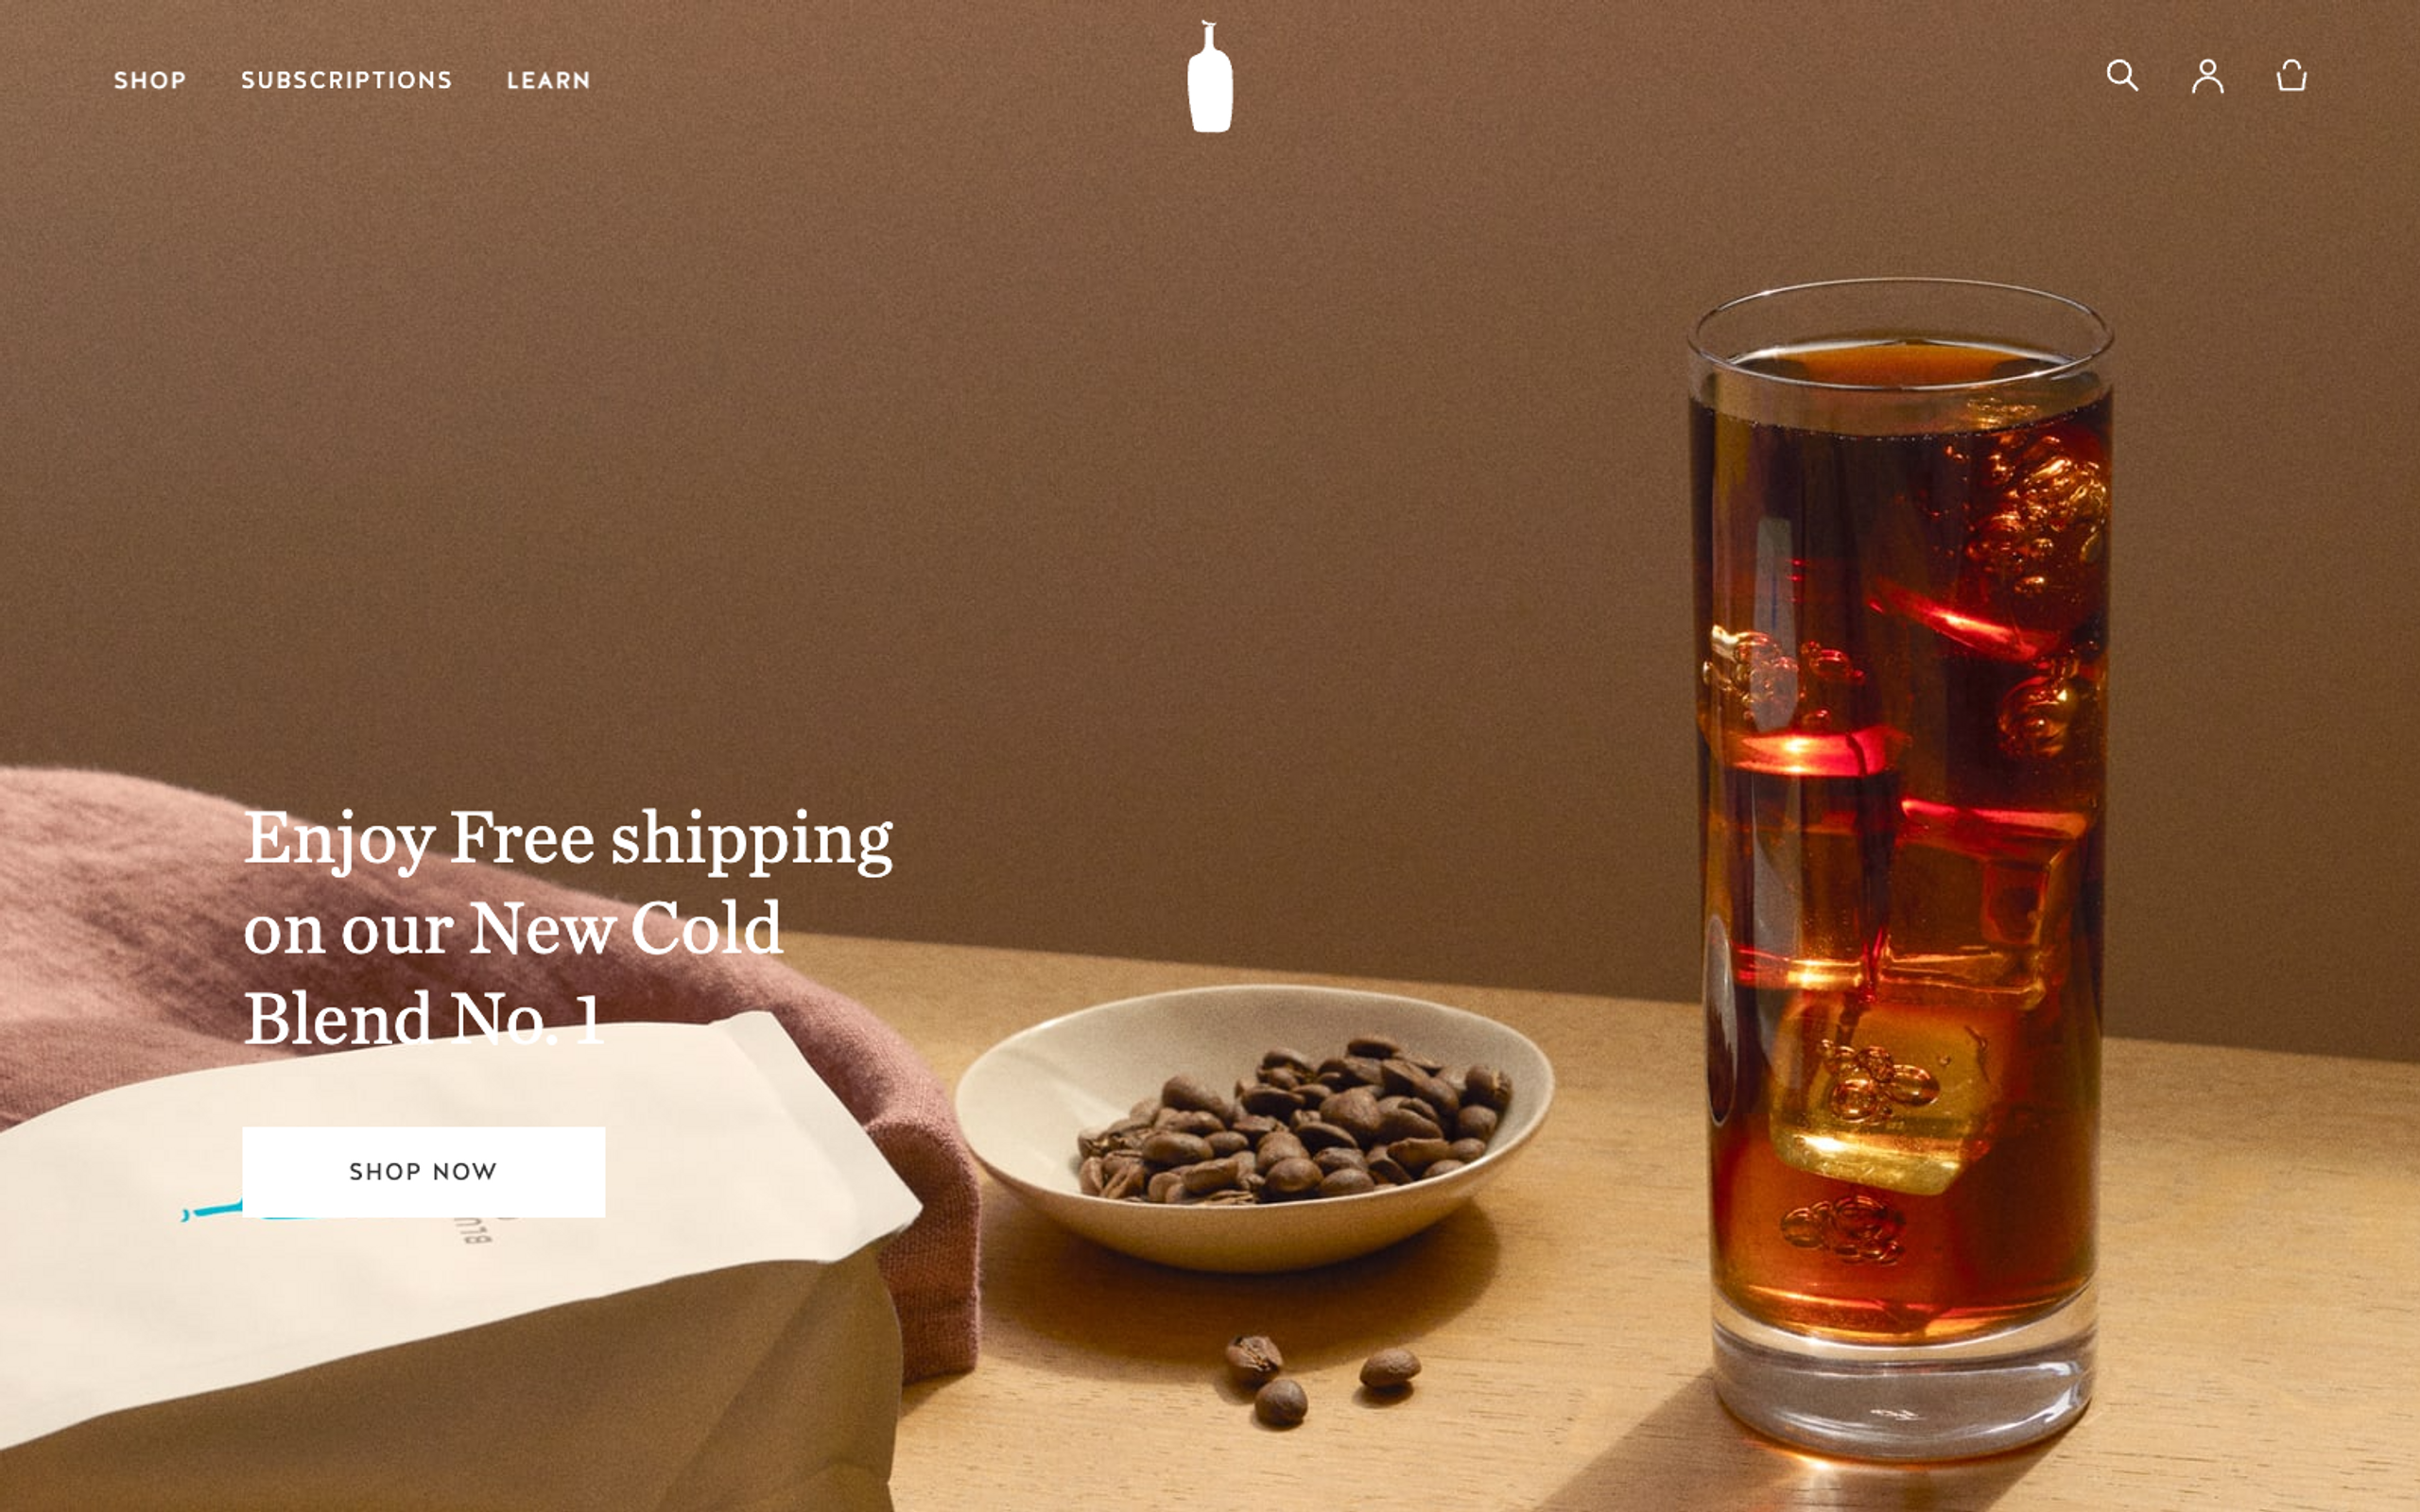 Blue Bottle Coffee Home Page